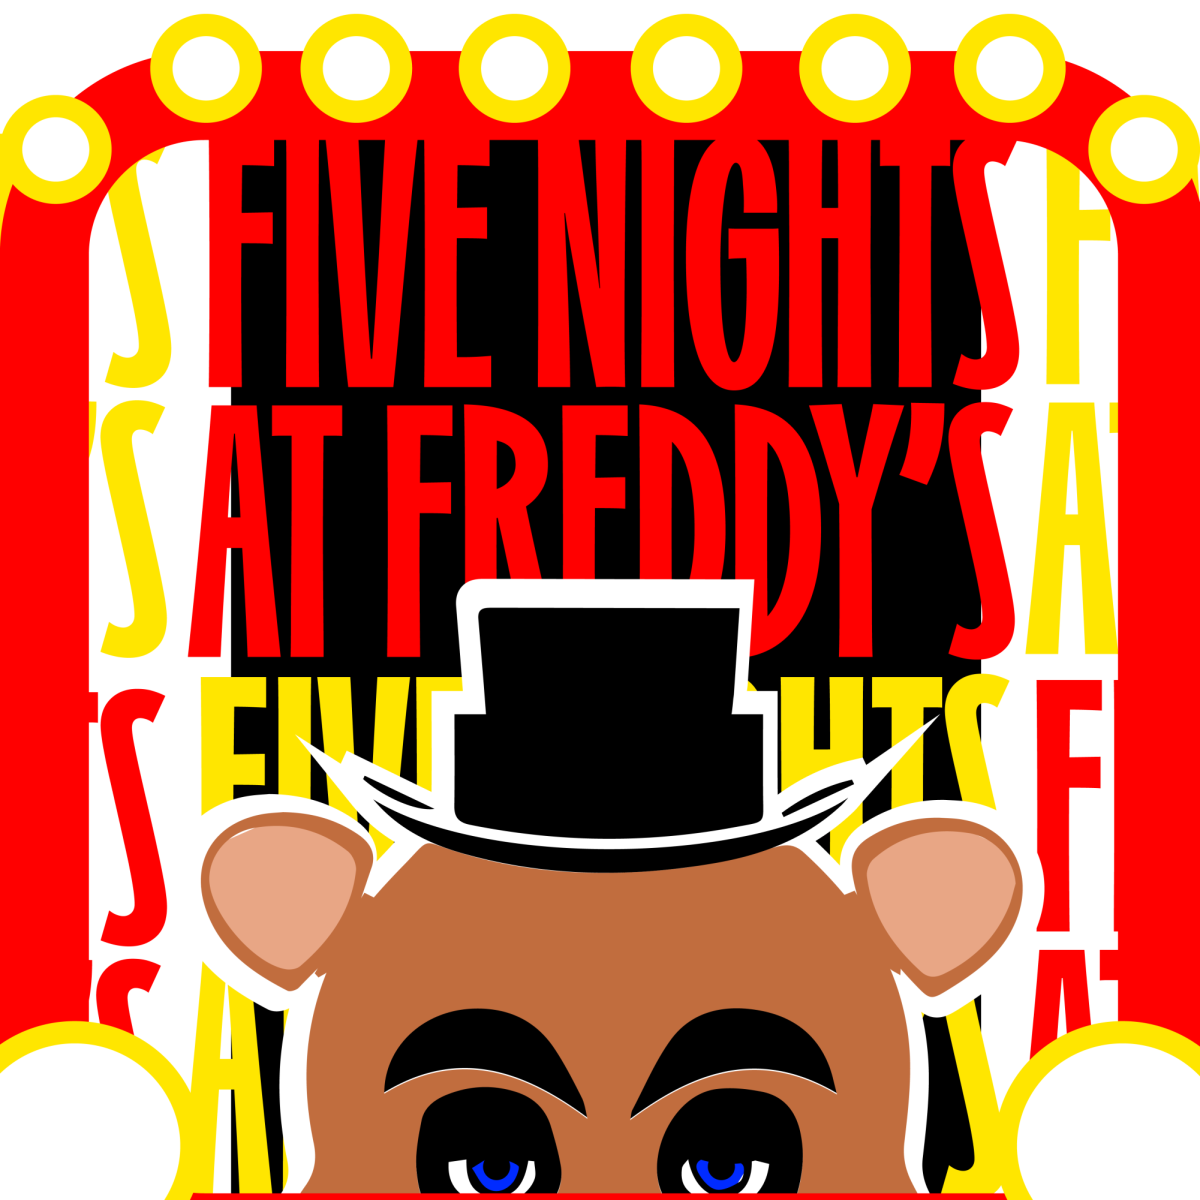 Five Nights at Freddy's' review: Game-turned-movie fails to